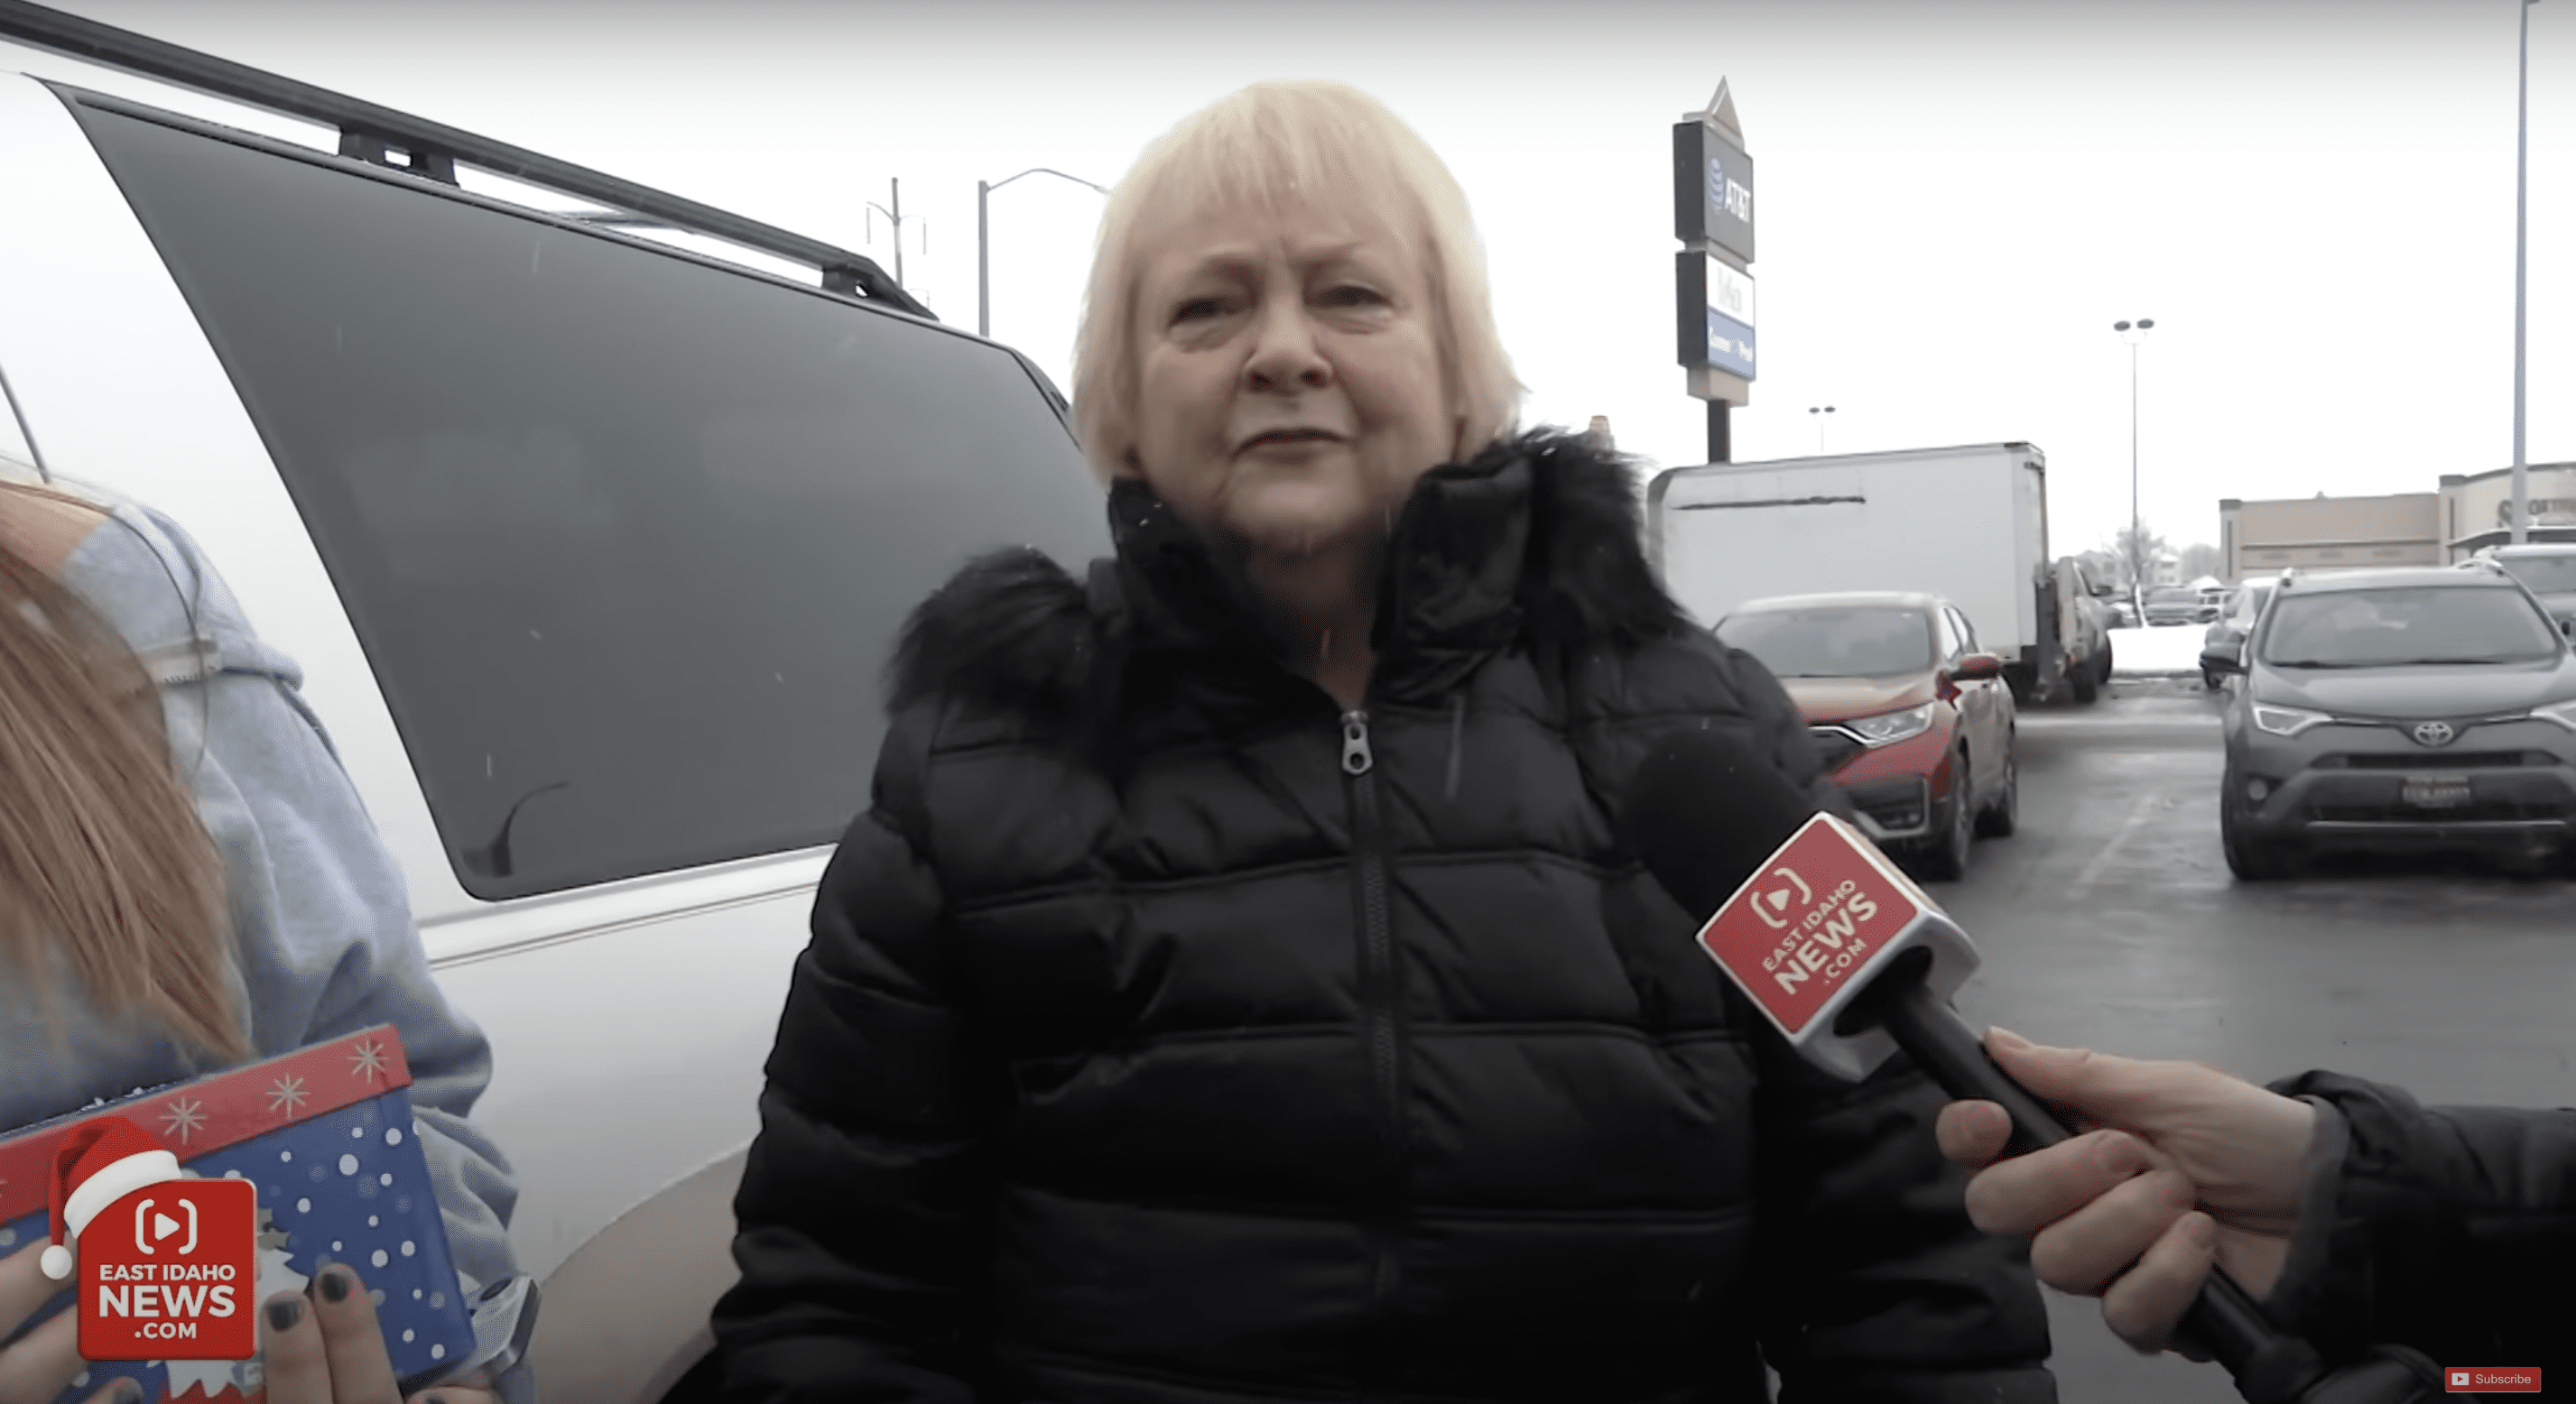 Ms. Cathy shares her views after Secret Santa's surprise. | Source: YouTube.com/East Idaho News